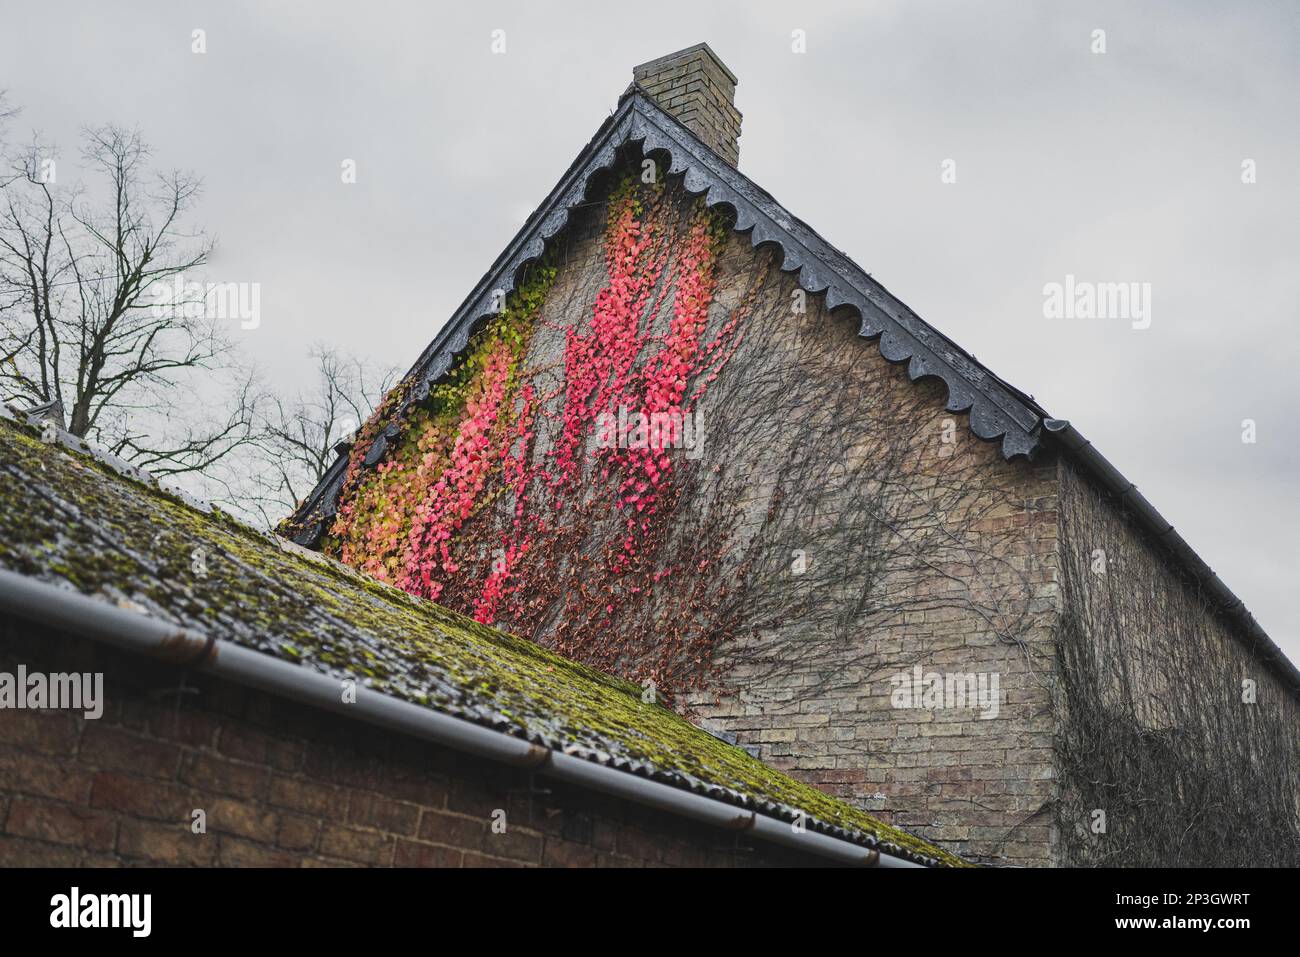 Bright red creepers seen climbing the wall of a very old English Manor House. Supposedly haunted for many years. Stock Photo